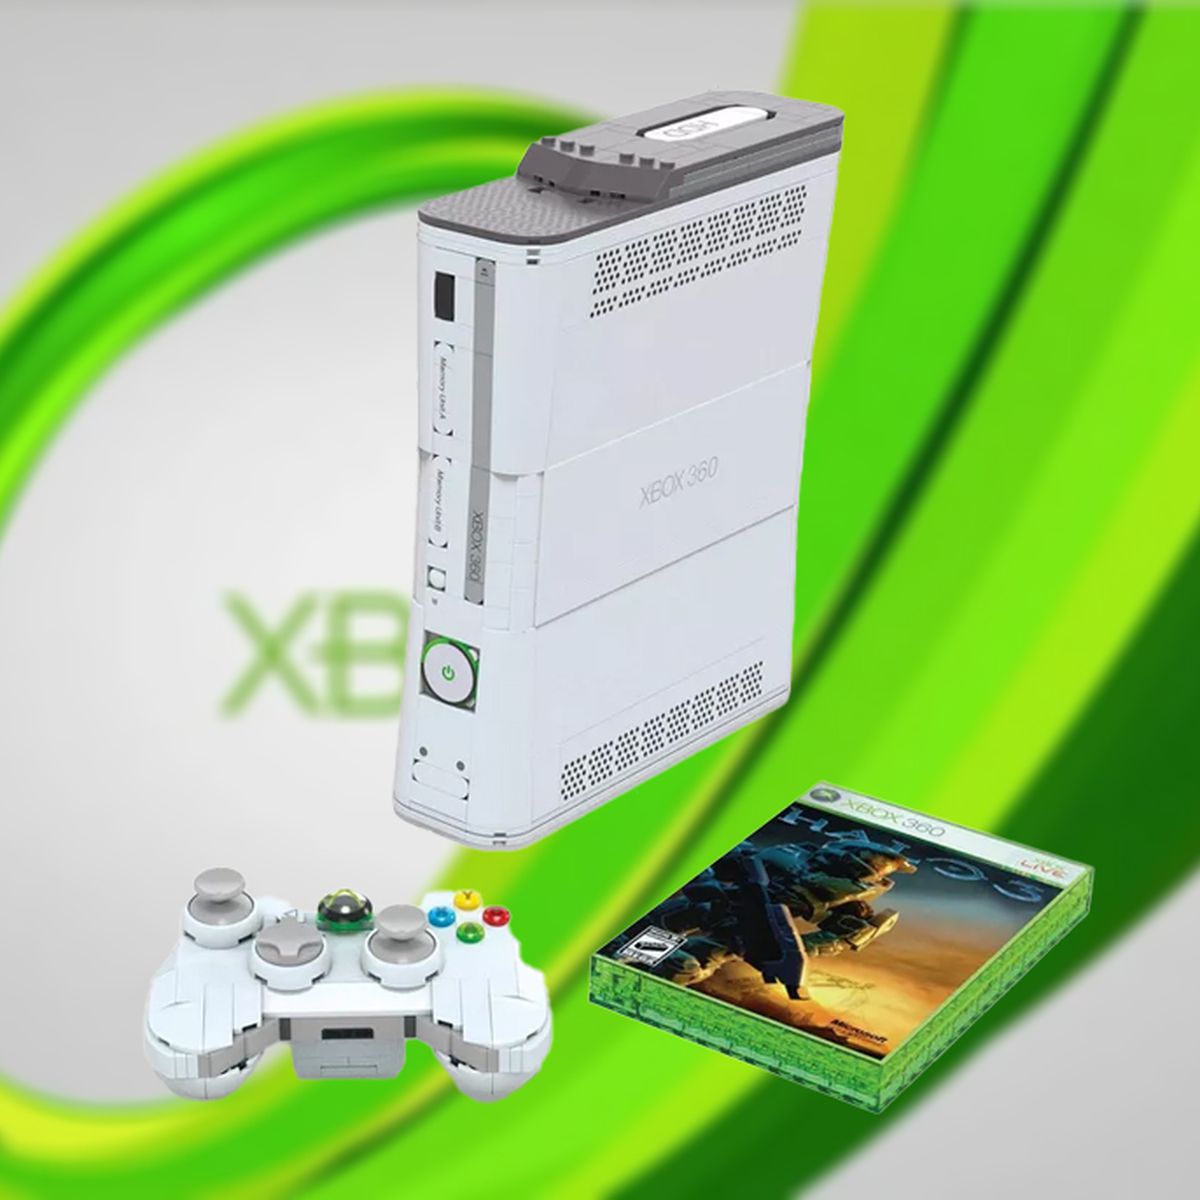 The buildable Xbox 360 replica is back in stock at Target, and it’s $50 off